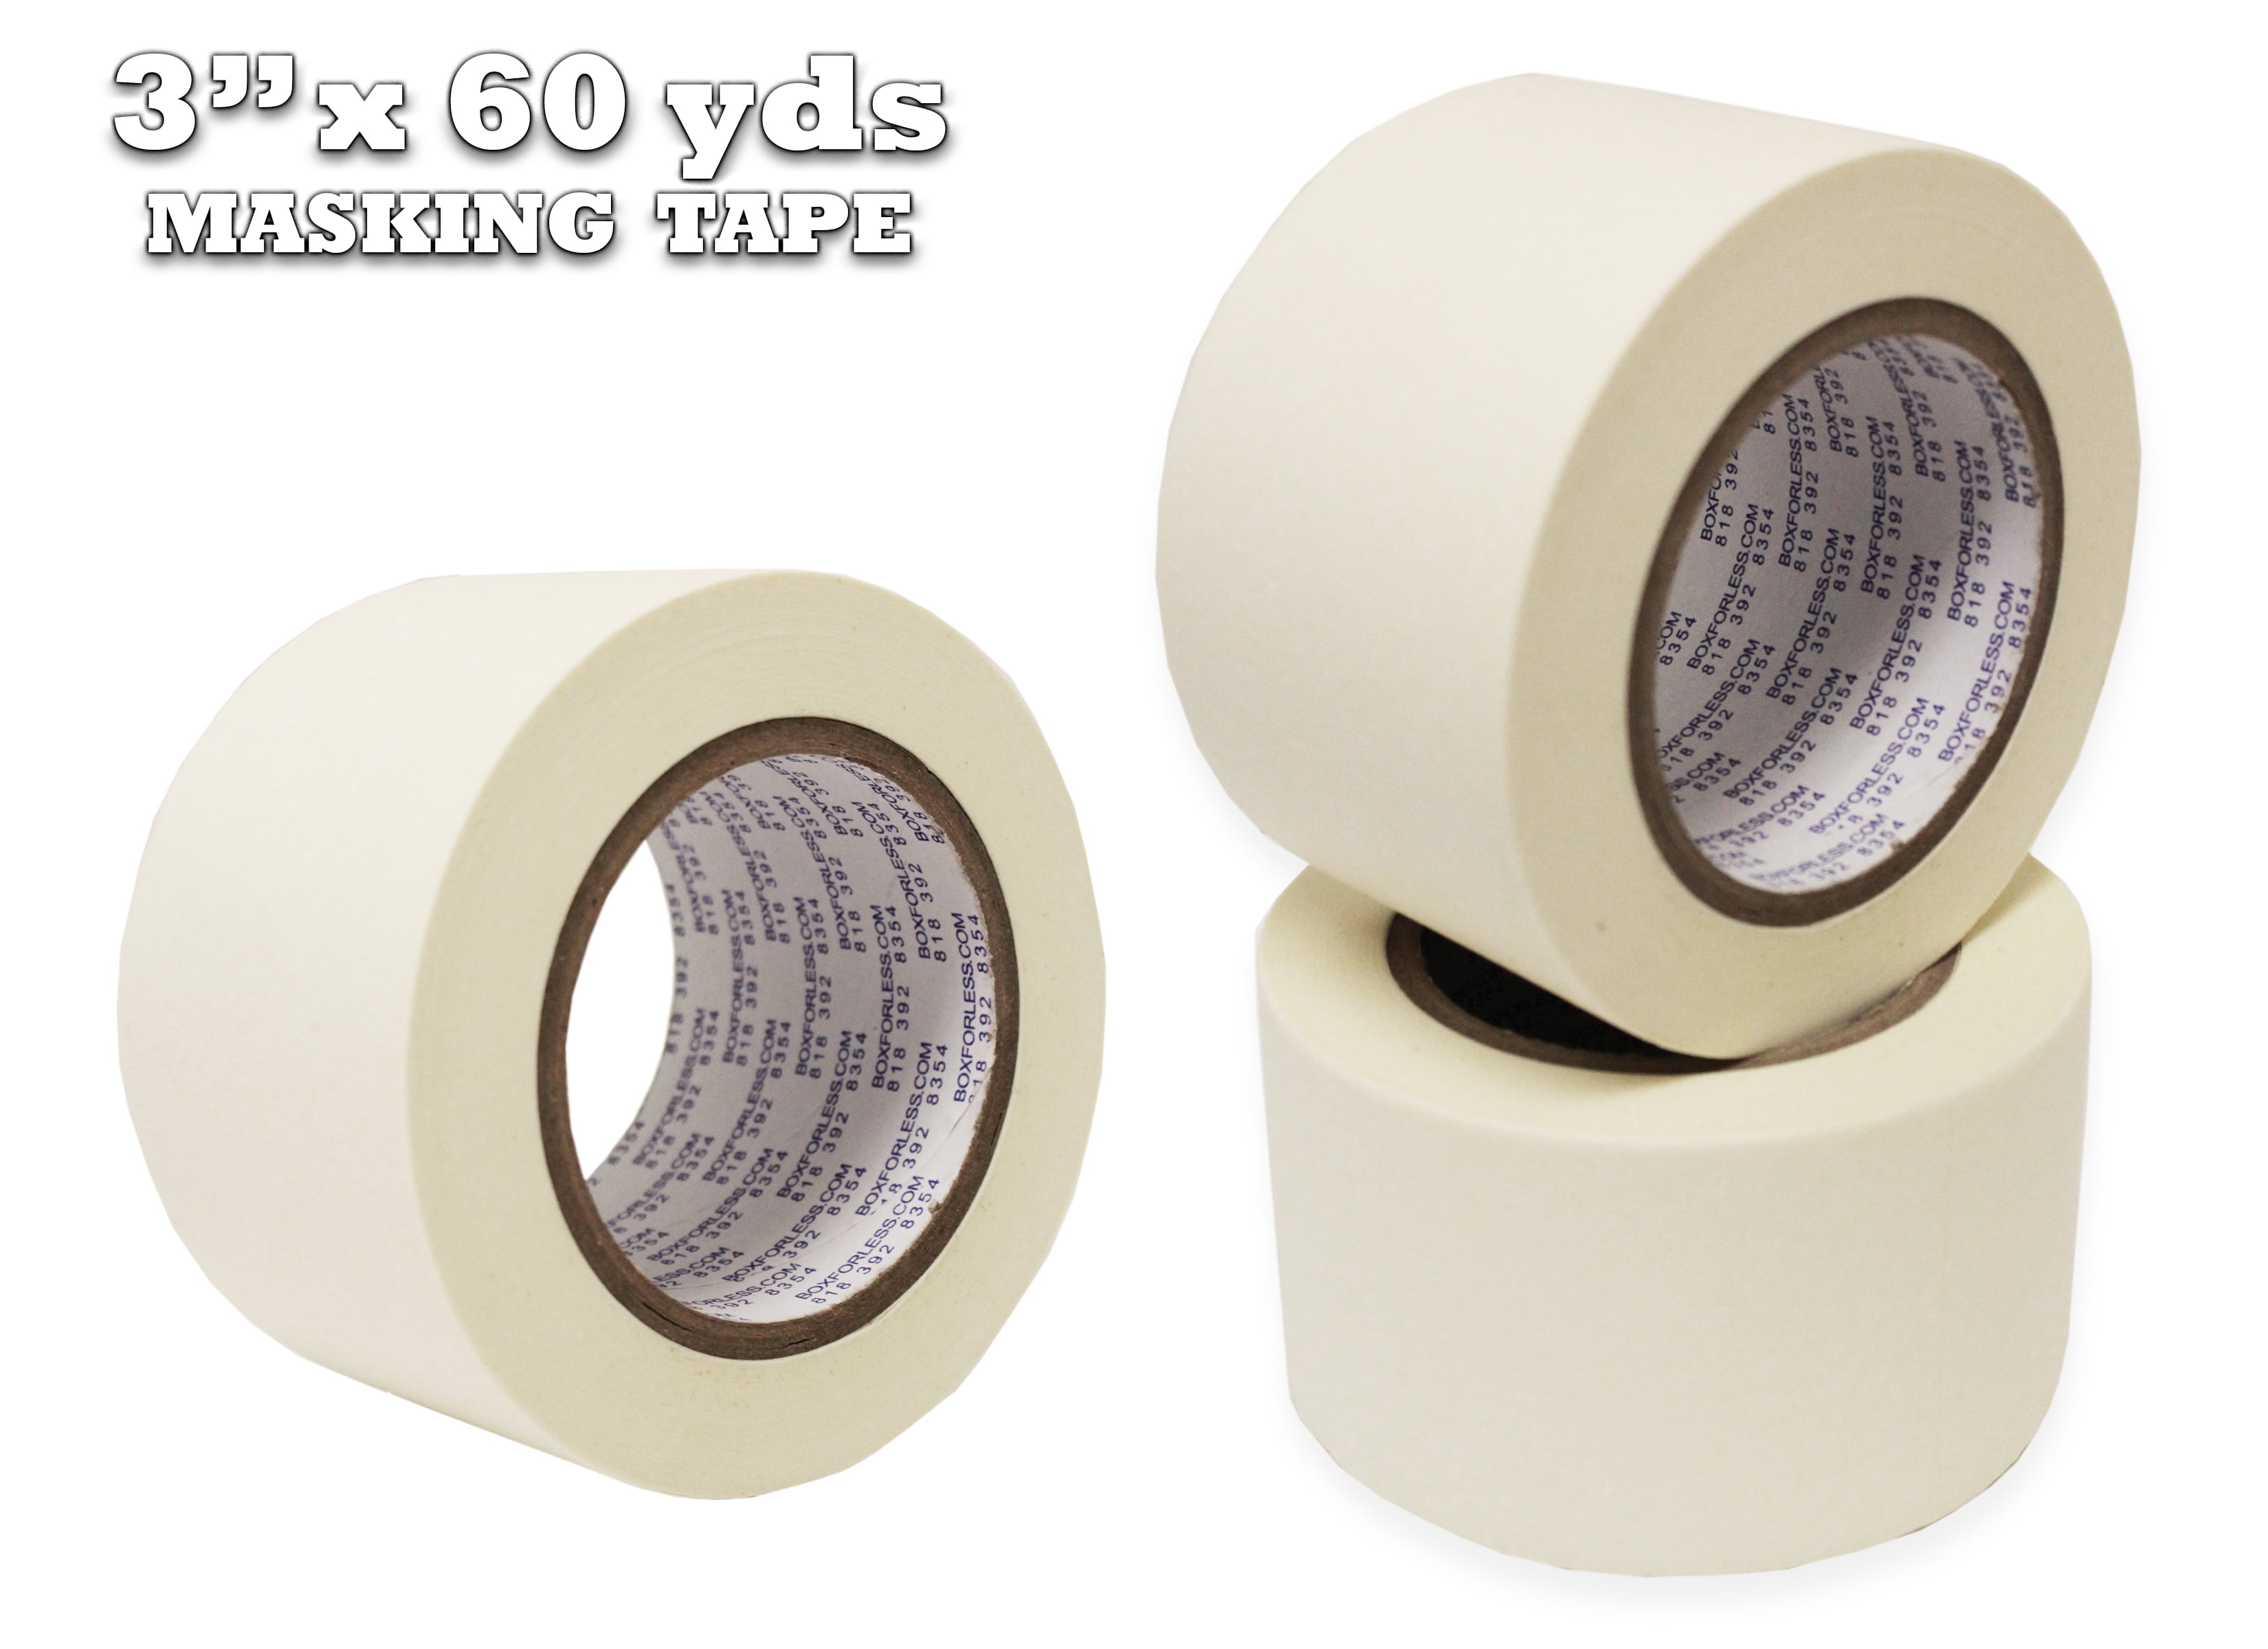 LELADY Masking Tape 1/2 Inch x 60 Yards - 12 Rolls, White Masking Tape, No  Residue Painters Tape, Craft Tape Rolls, High Adhesive Decorative Tape for